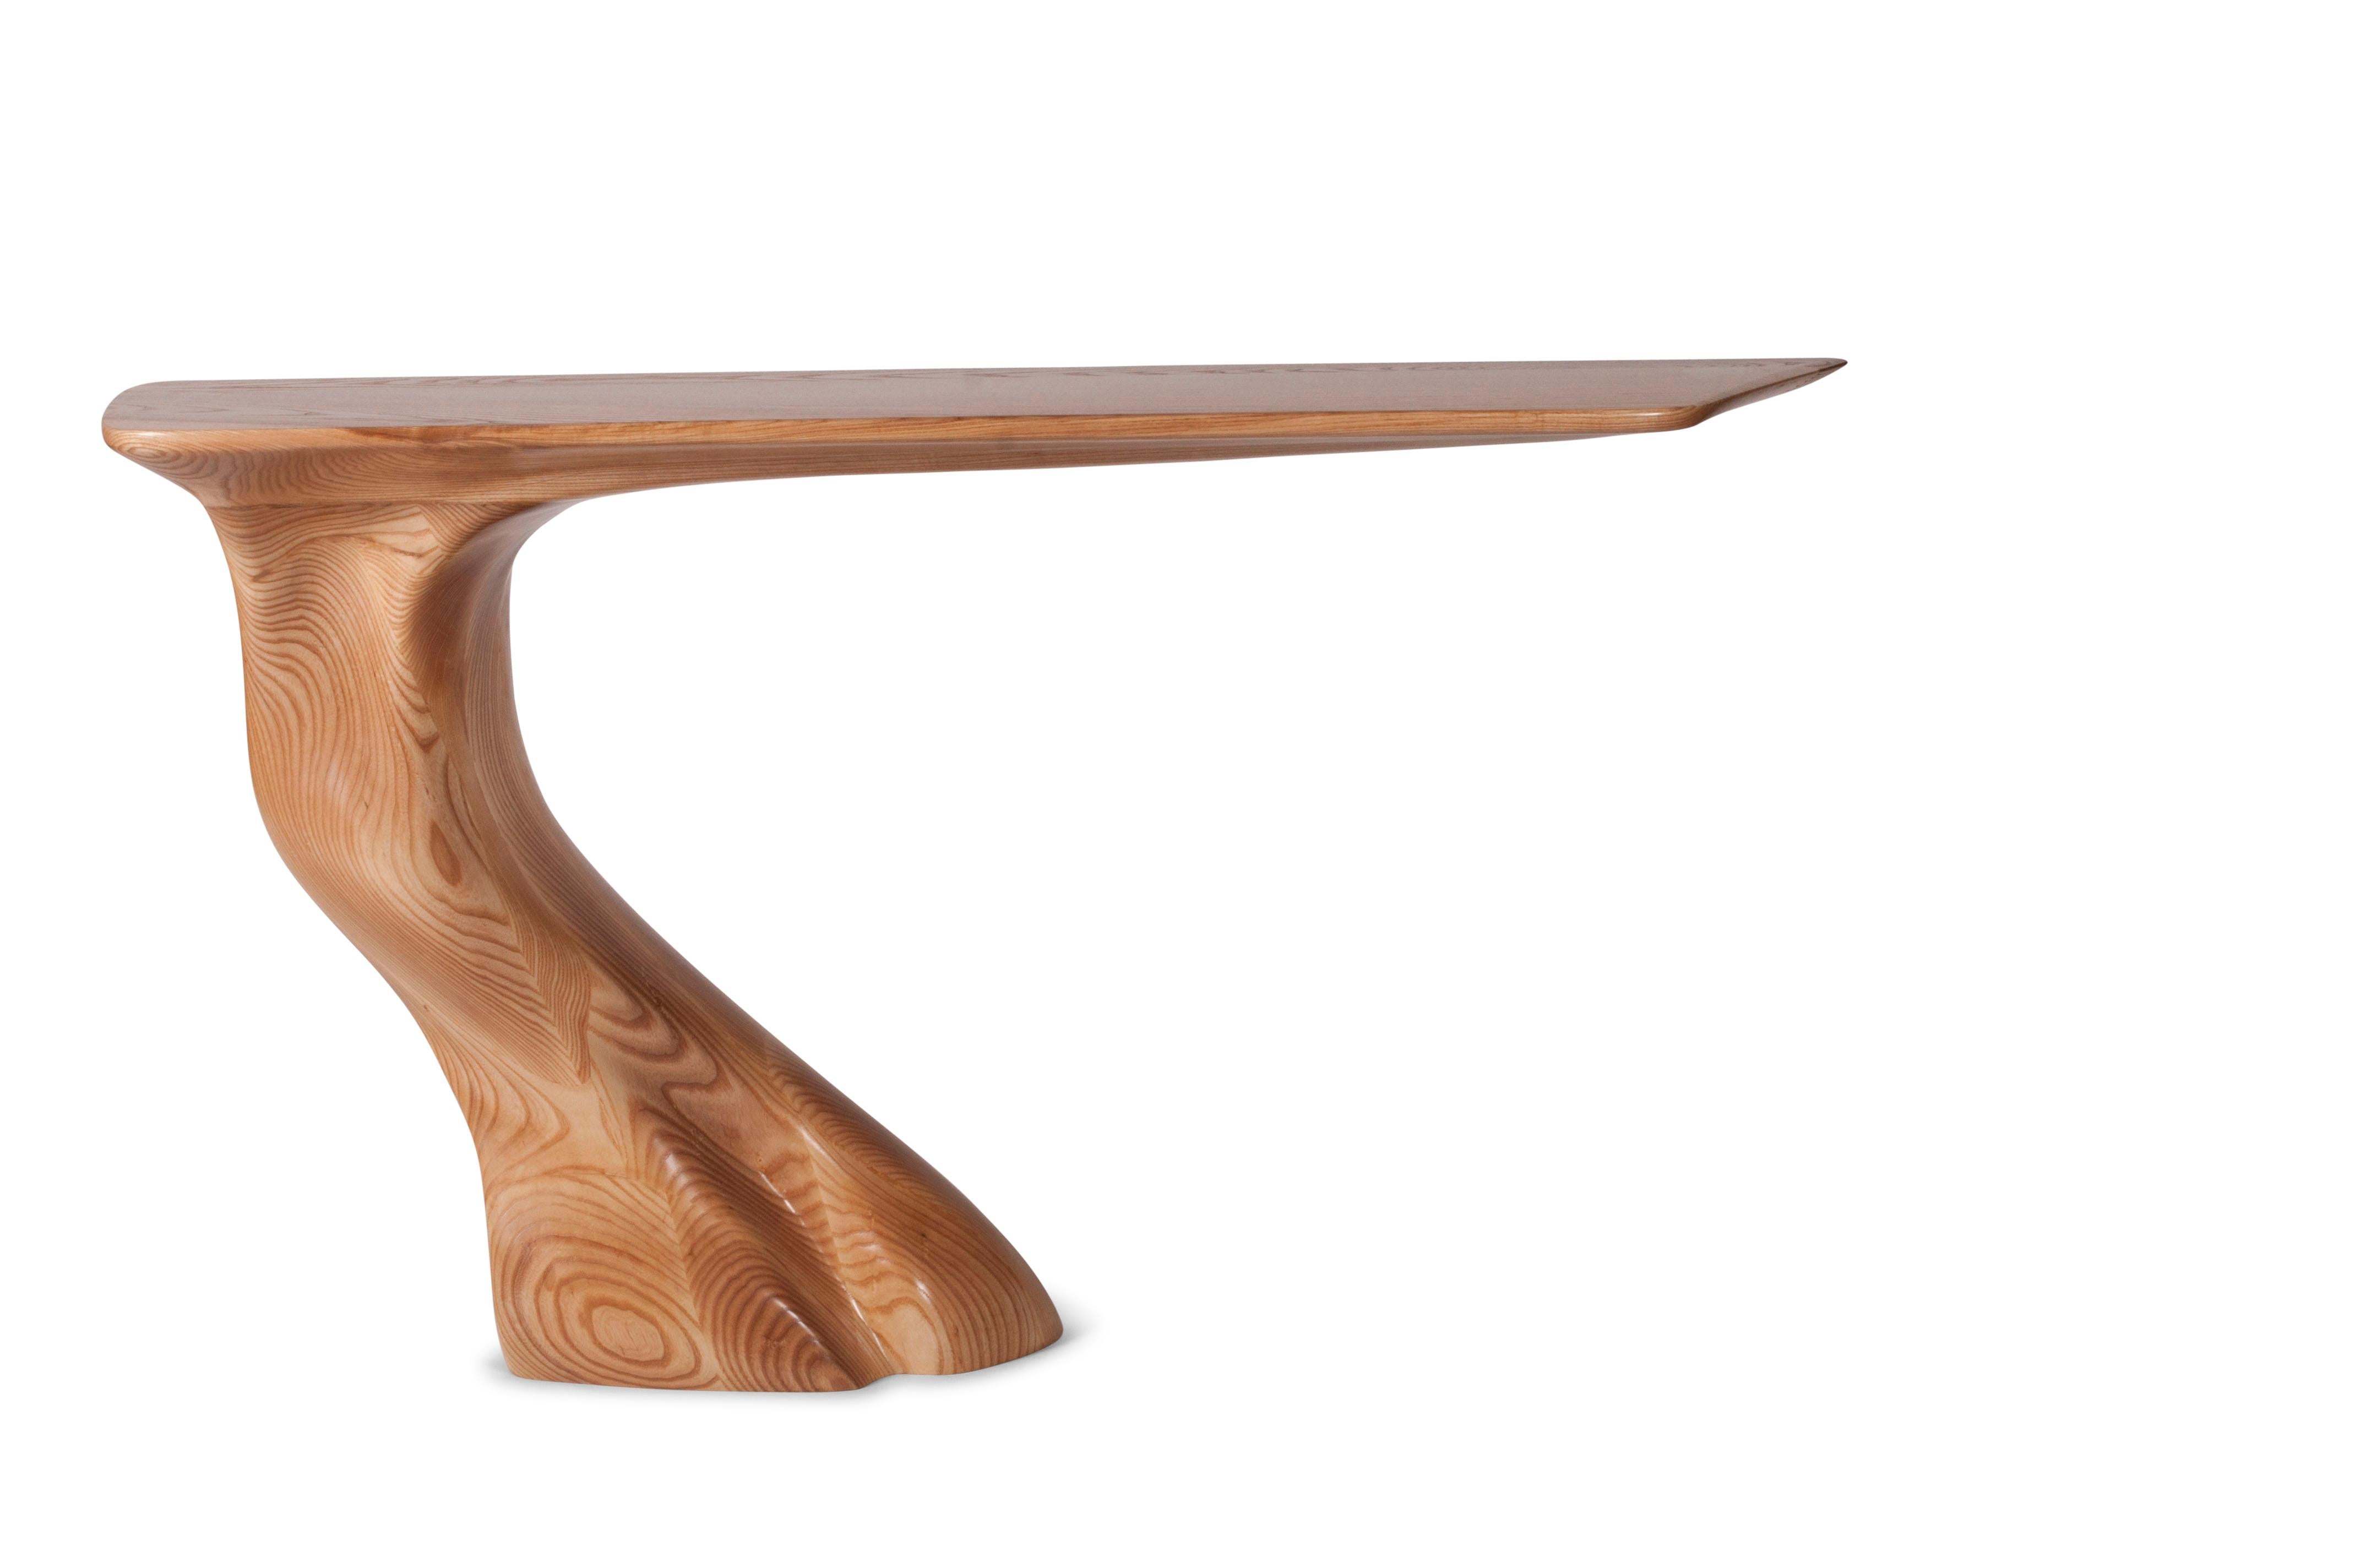 Frolic console is unique wood carved piece designed and manufactured by Amorph. Frolic is wall mount console and bracket will be provided. We are able to customize the sizes and finishes.
  
About Amorph: 
Amorph is a design and manufacturing